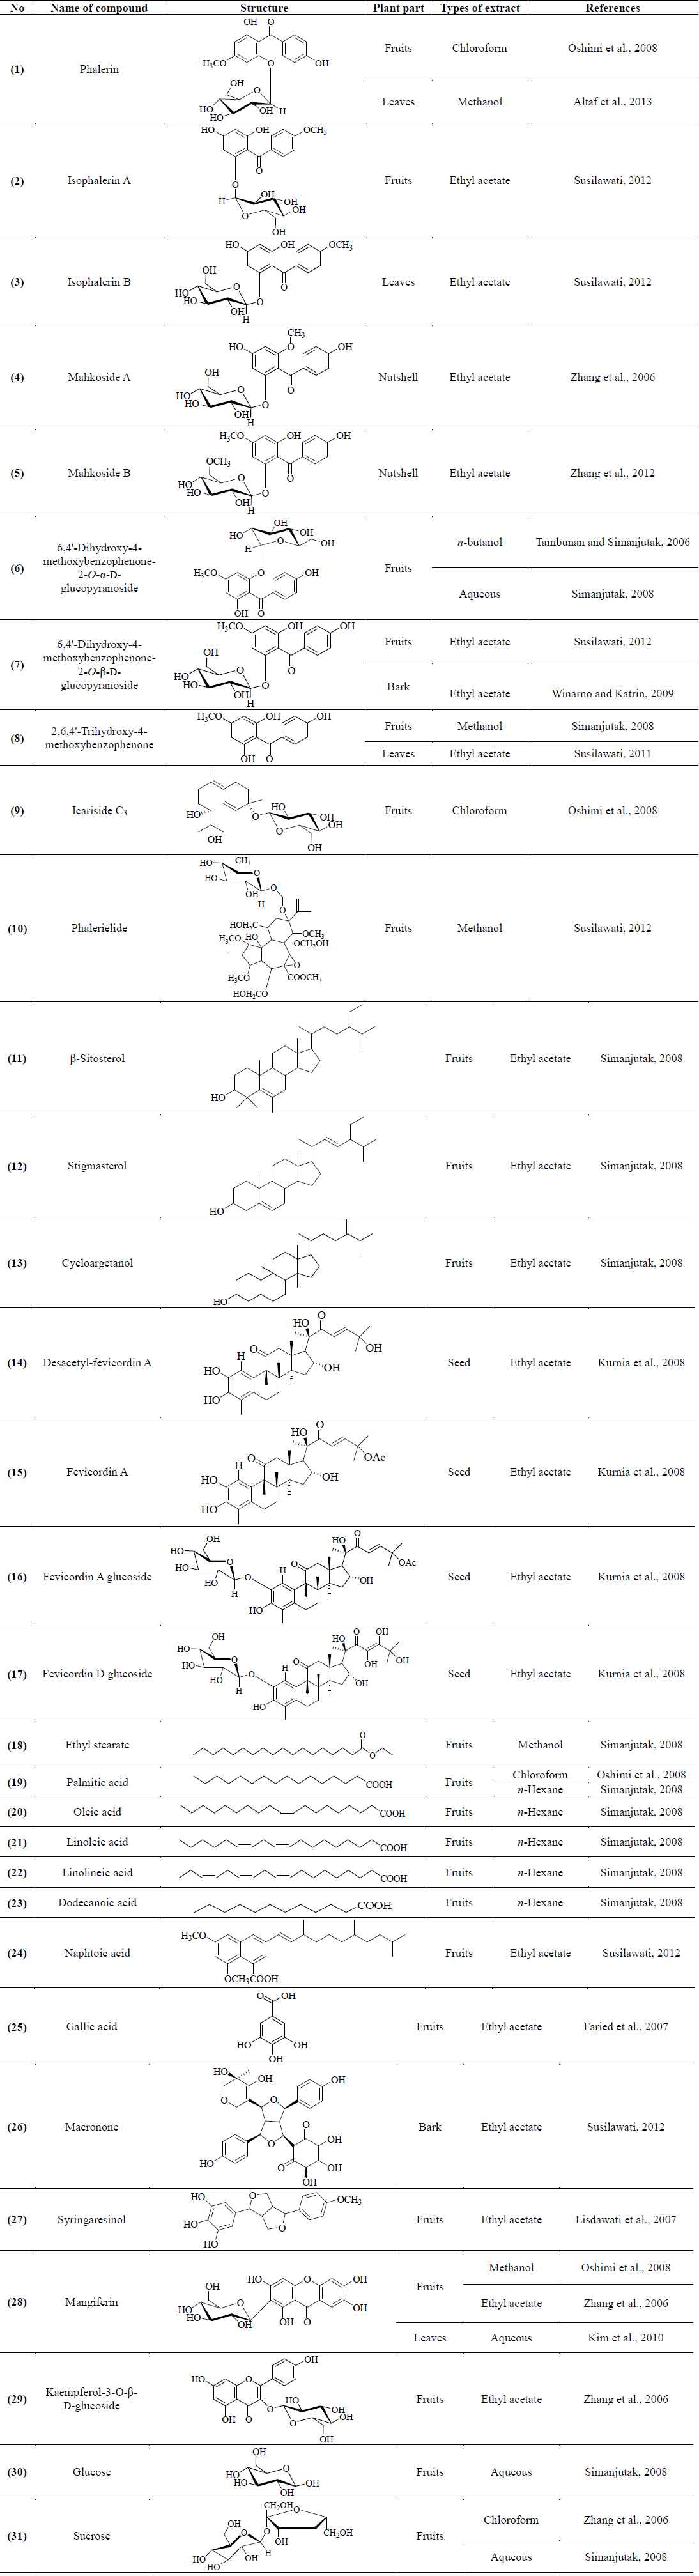 Phytochemicals of P. macrocarpa according to its part and types of extract used